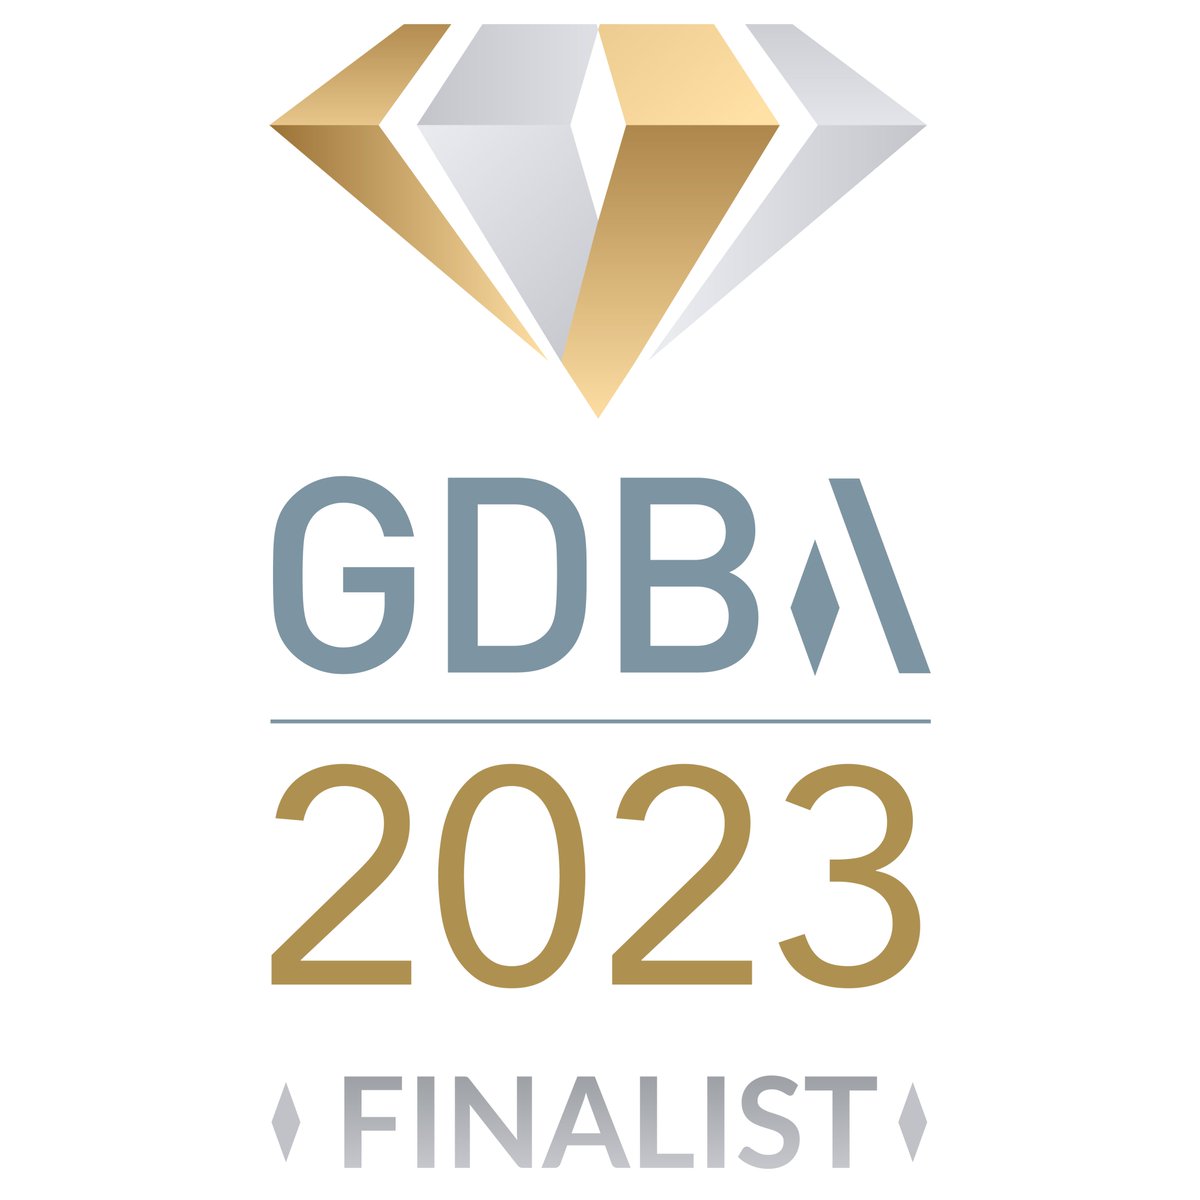 We are delighted to start 2023 as we finished 2022, as award finalists - this time from Gatwick Diamond Business #gdbizawards
'The Award for Community Contribution'
Wishing all finalists the best of luck
#localbusiness #awards #events #networkingevents #fundraisingevents